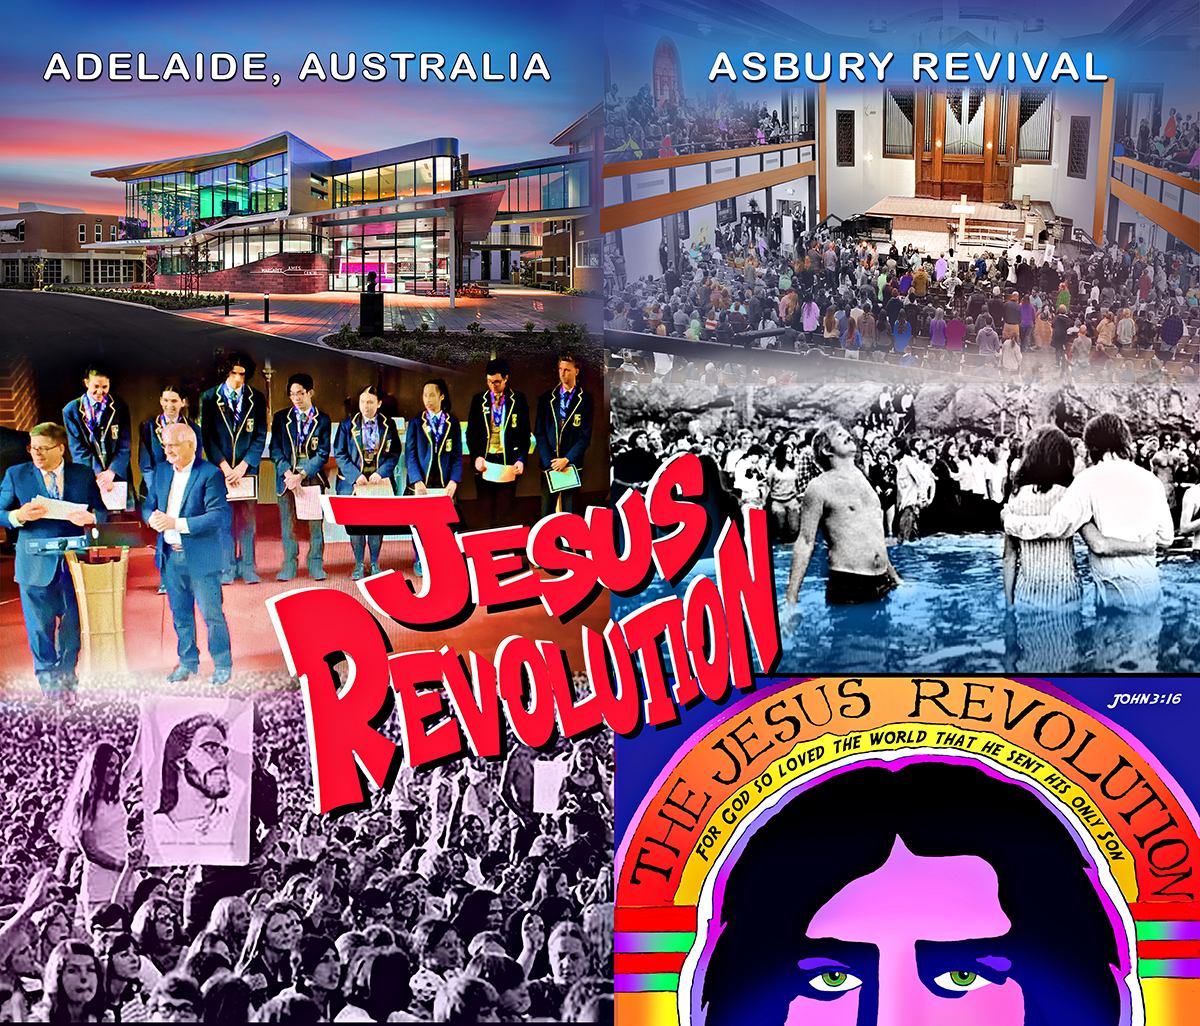 The Prophetic Matrix Book and Generation Z Lead Spiritual Awakening with Asbury Revival and Jesus Revolution Movie